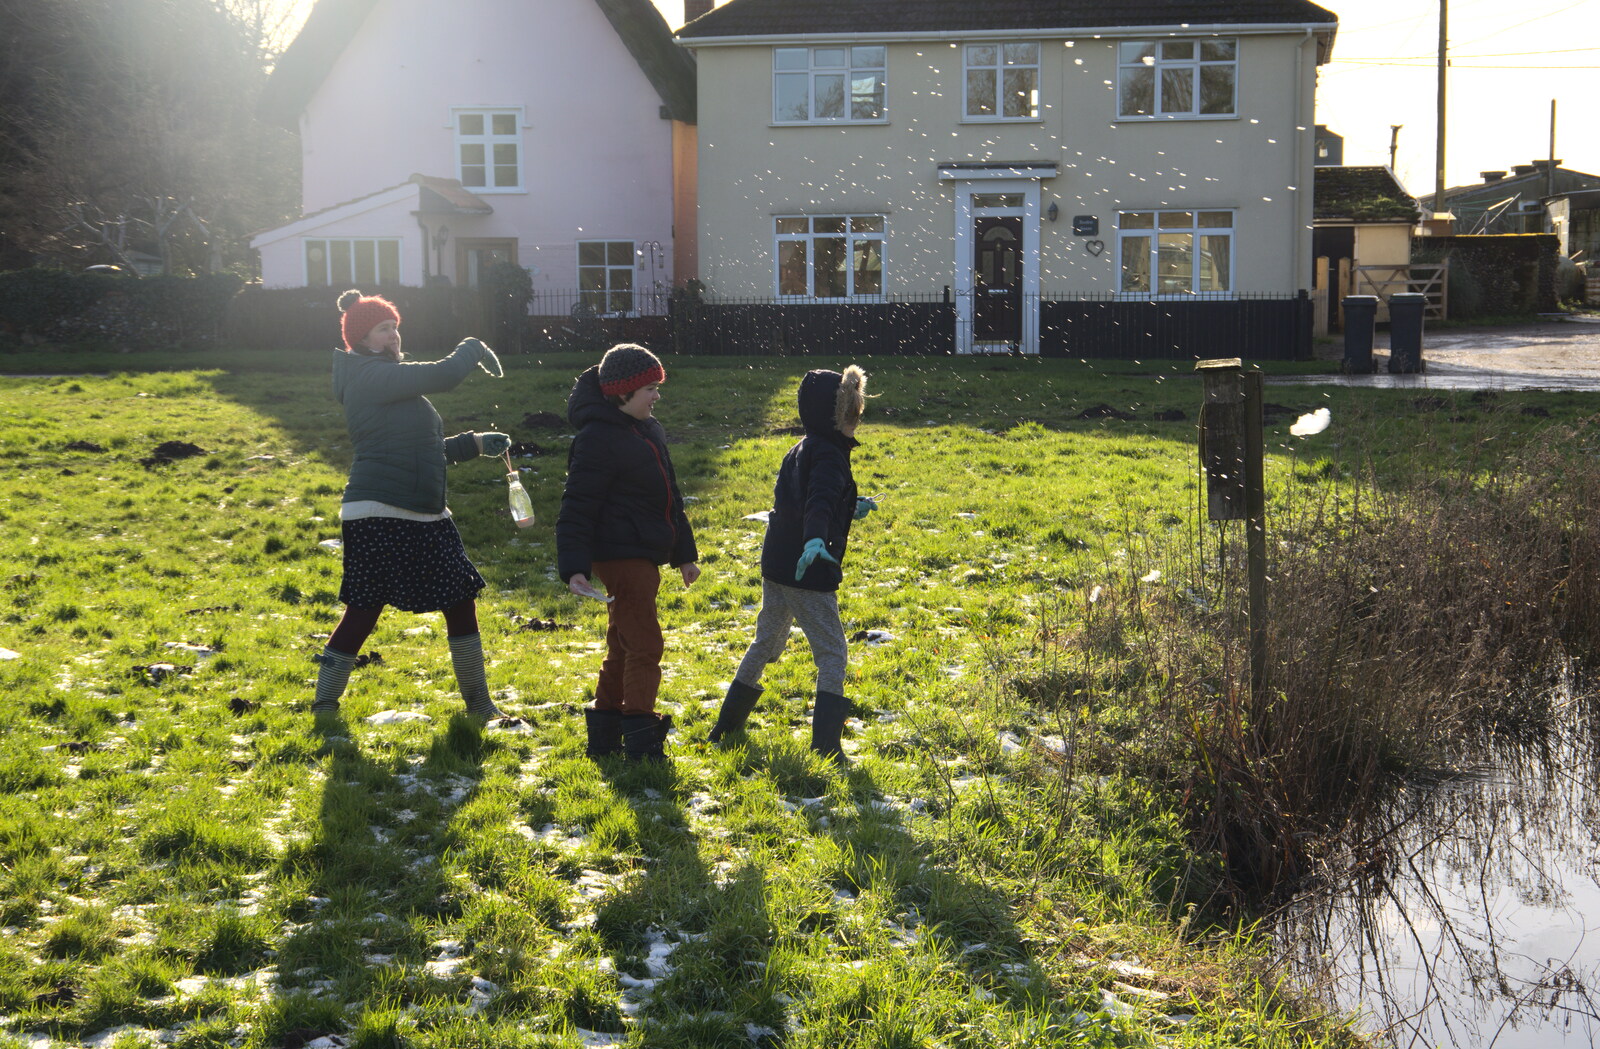 Everyone flings snowballs onto the pond from Winter Lockdown Walks, Thrandeston and Brome, Suffolk - 24th January 2021